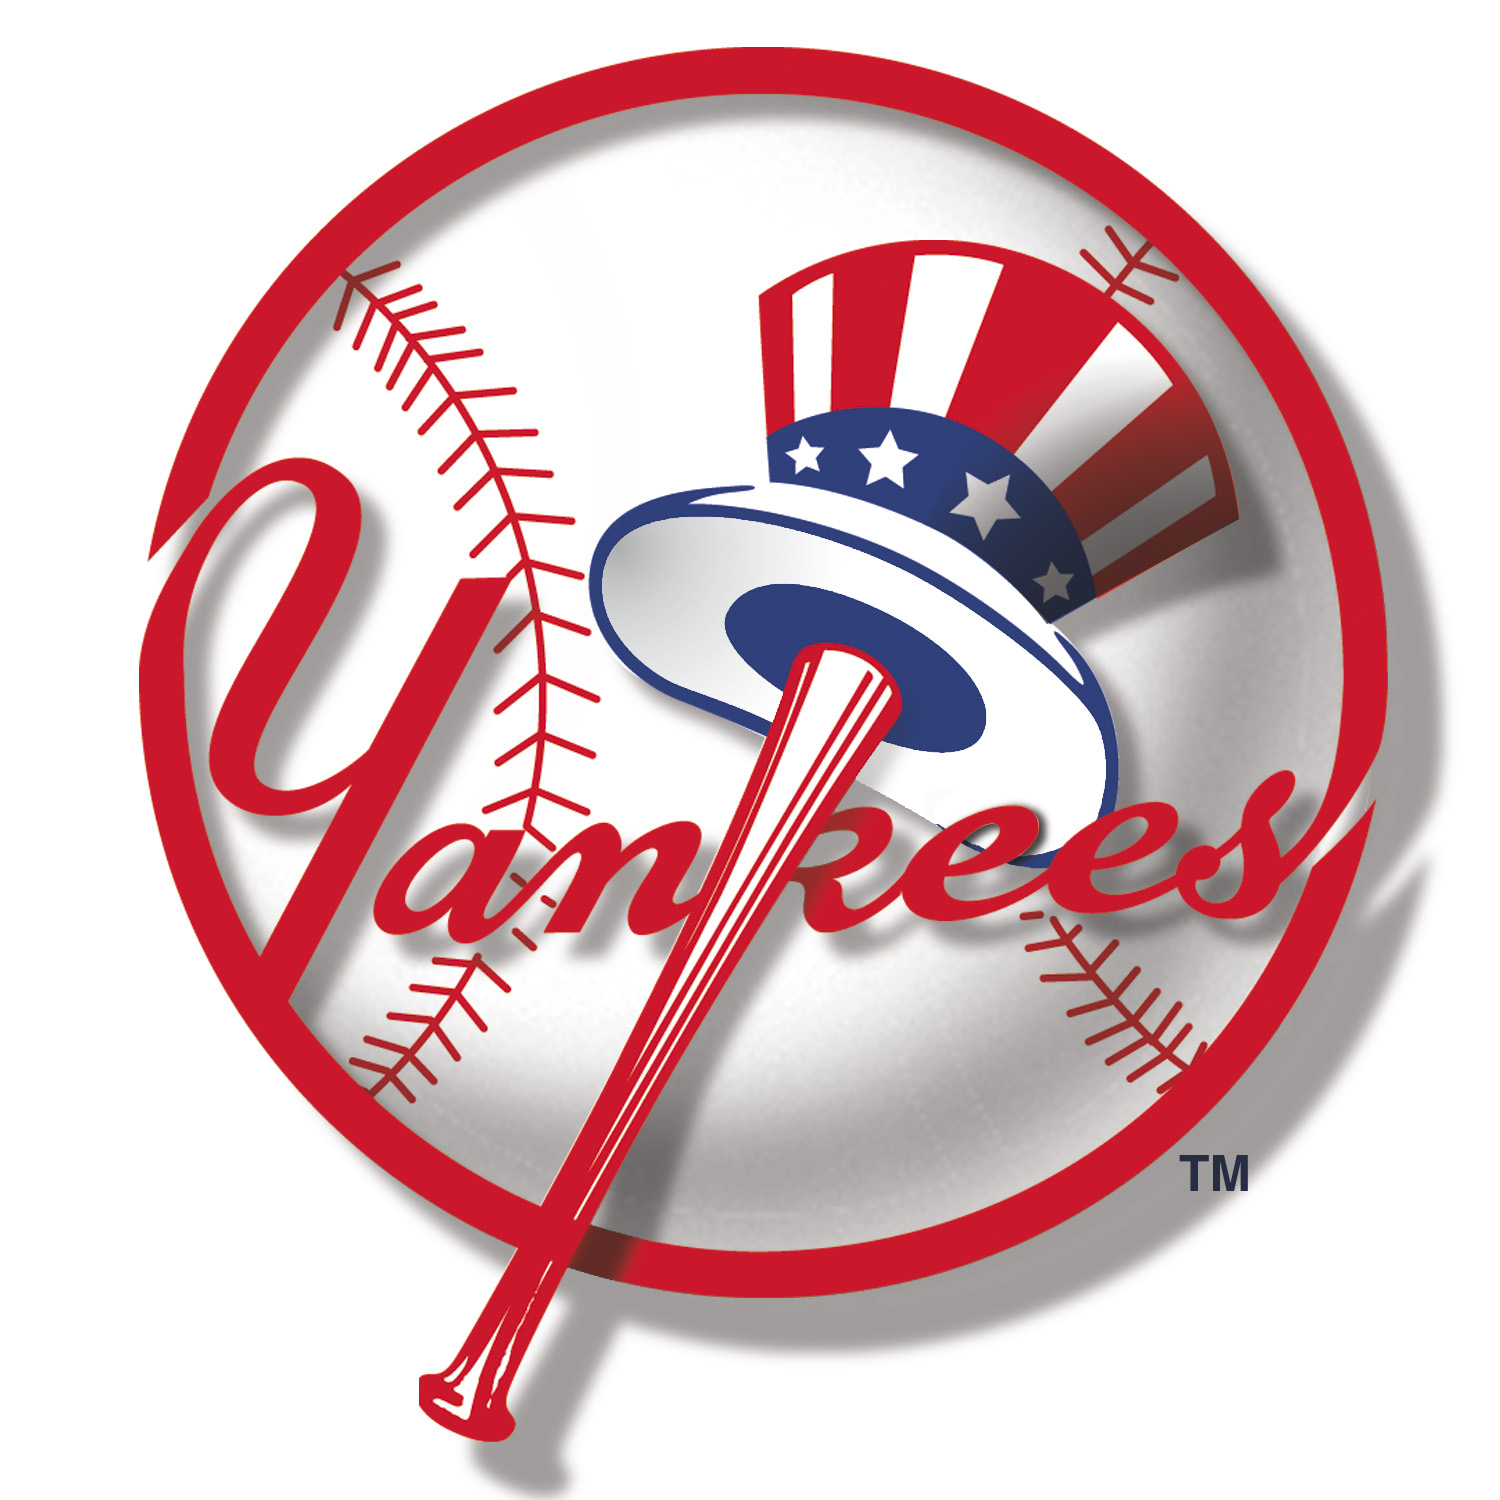 Image of the NY Yankees Logo. A baseball with red outline and stitching, "Yankees" written out in red lettering with, a baseball bat with a red and white striped hat with a blue band and white stars on the top end of the bat. 